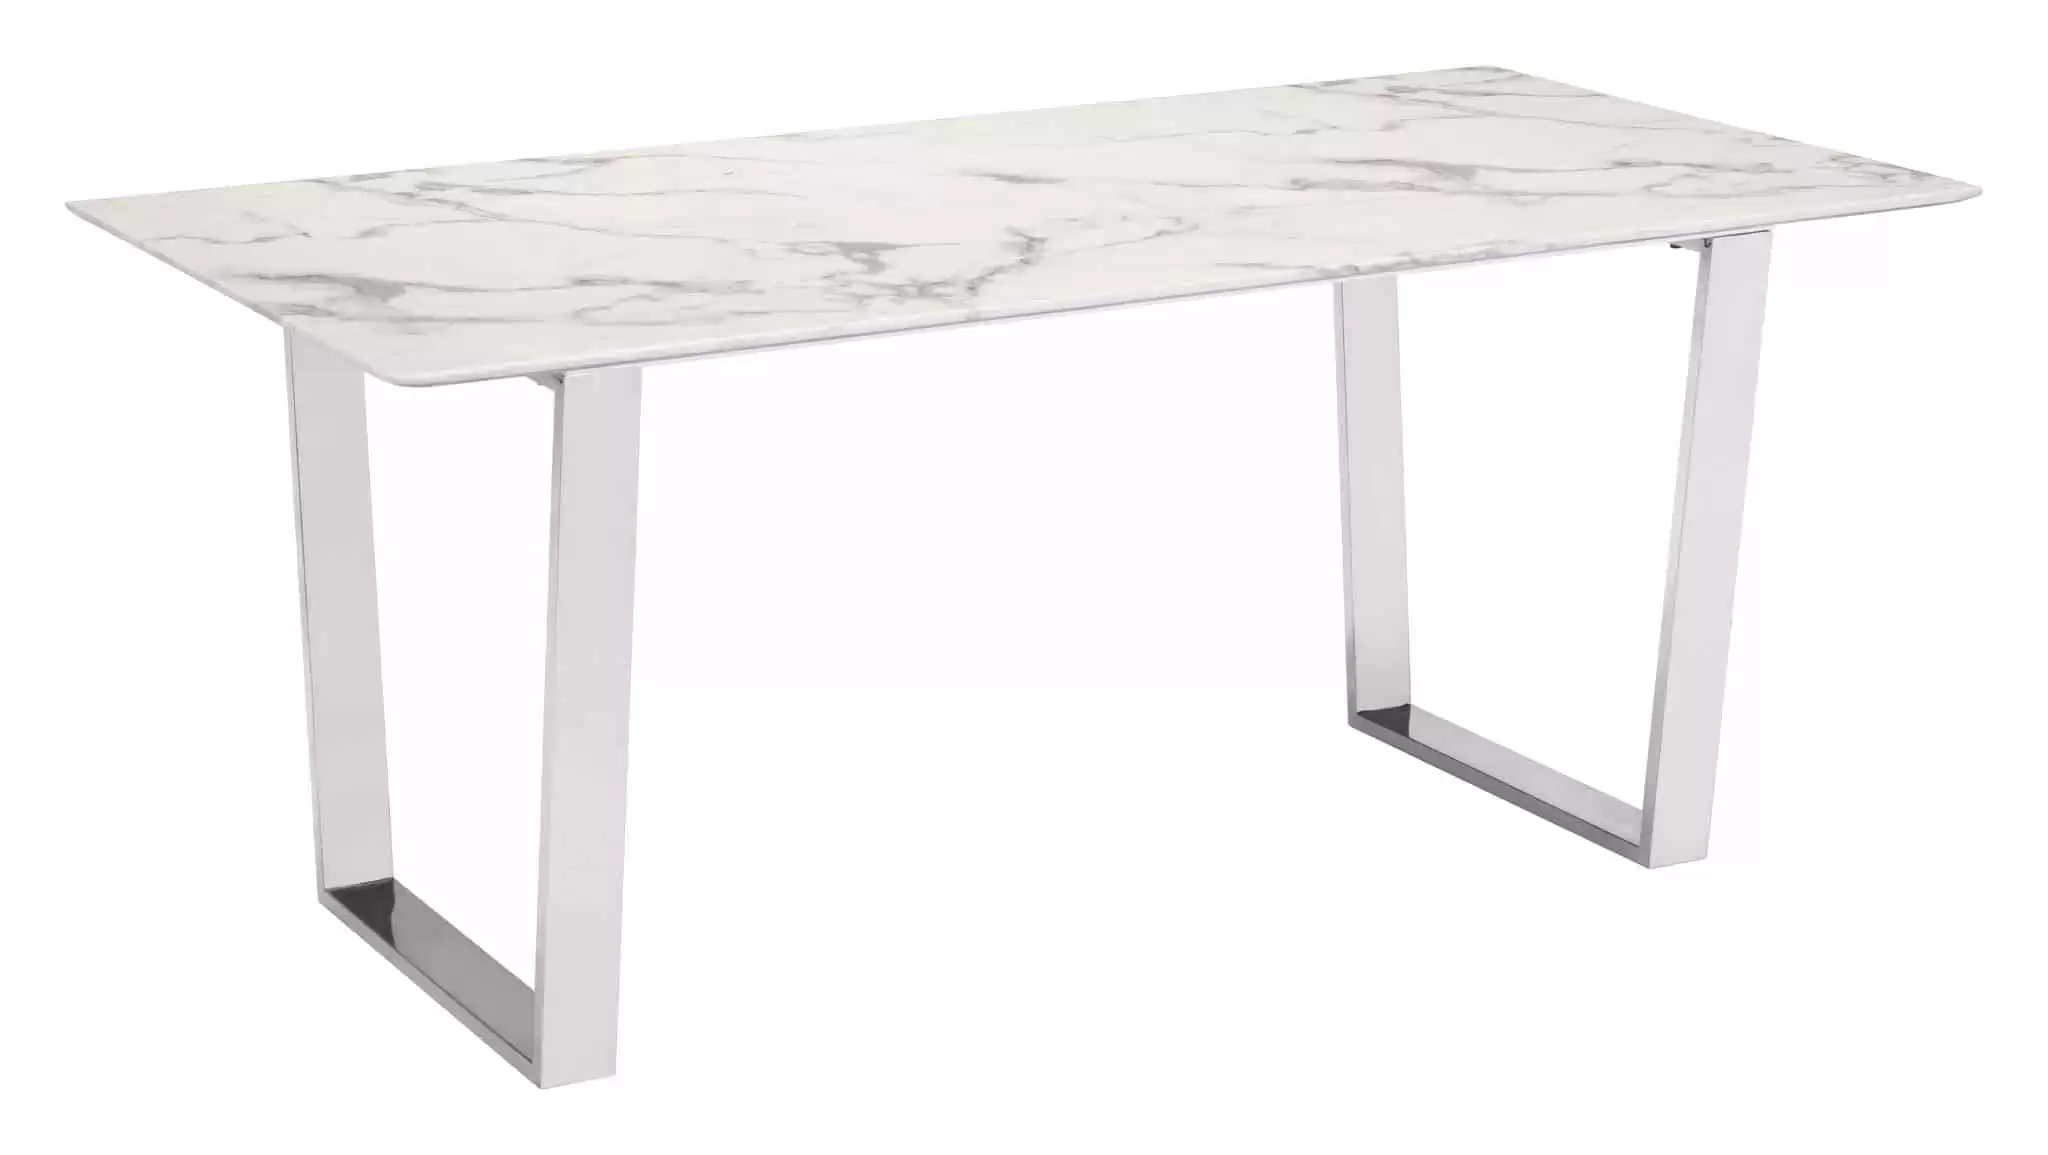 Zenith Claire Metal Dining Table